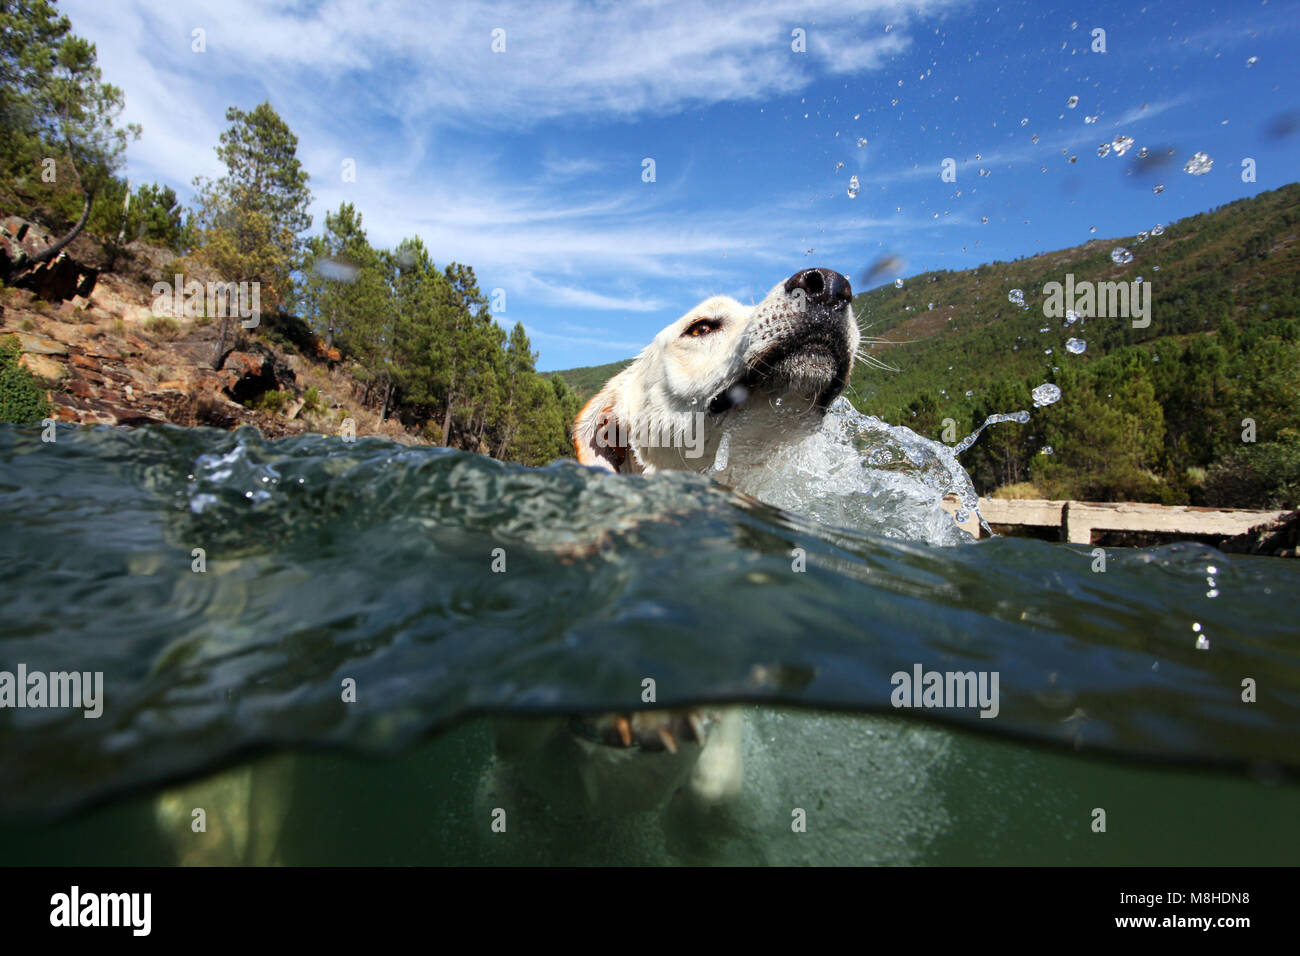 Under over water split view of a dog Stock Photo